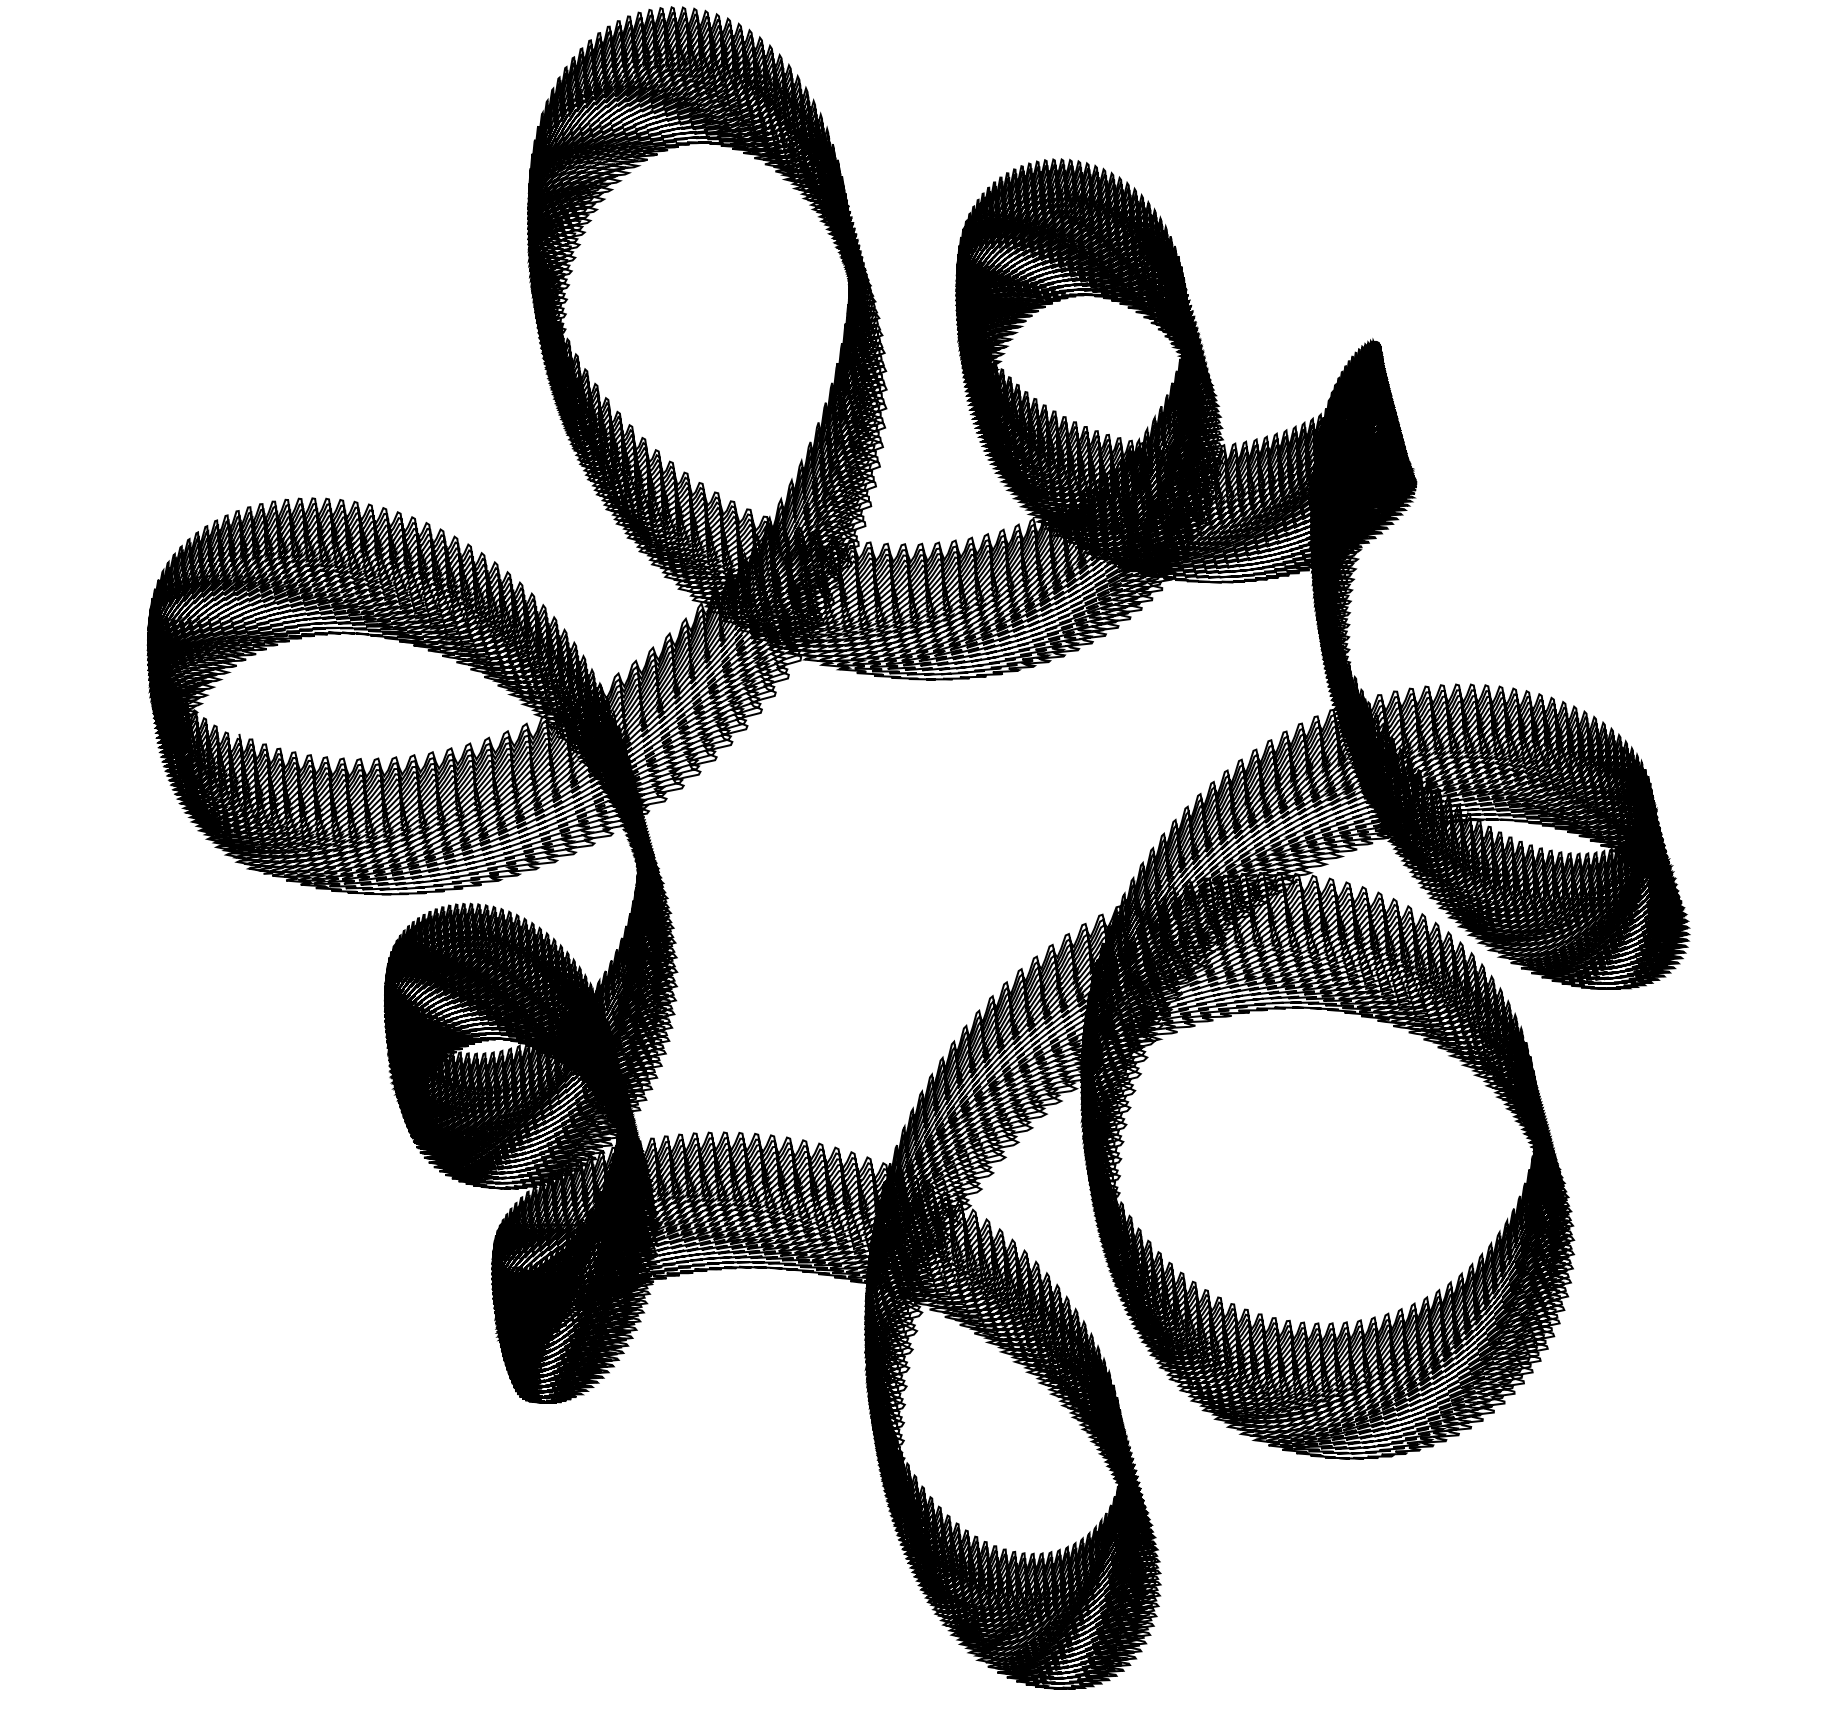 a black line diagram on white. a ribbon with ribbing that loops round on itself several times. 